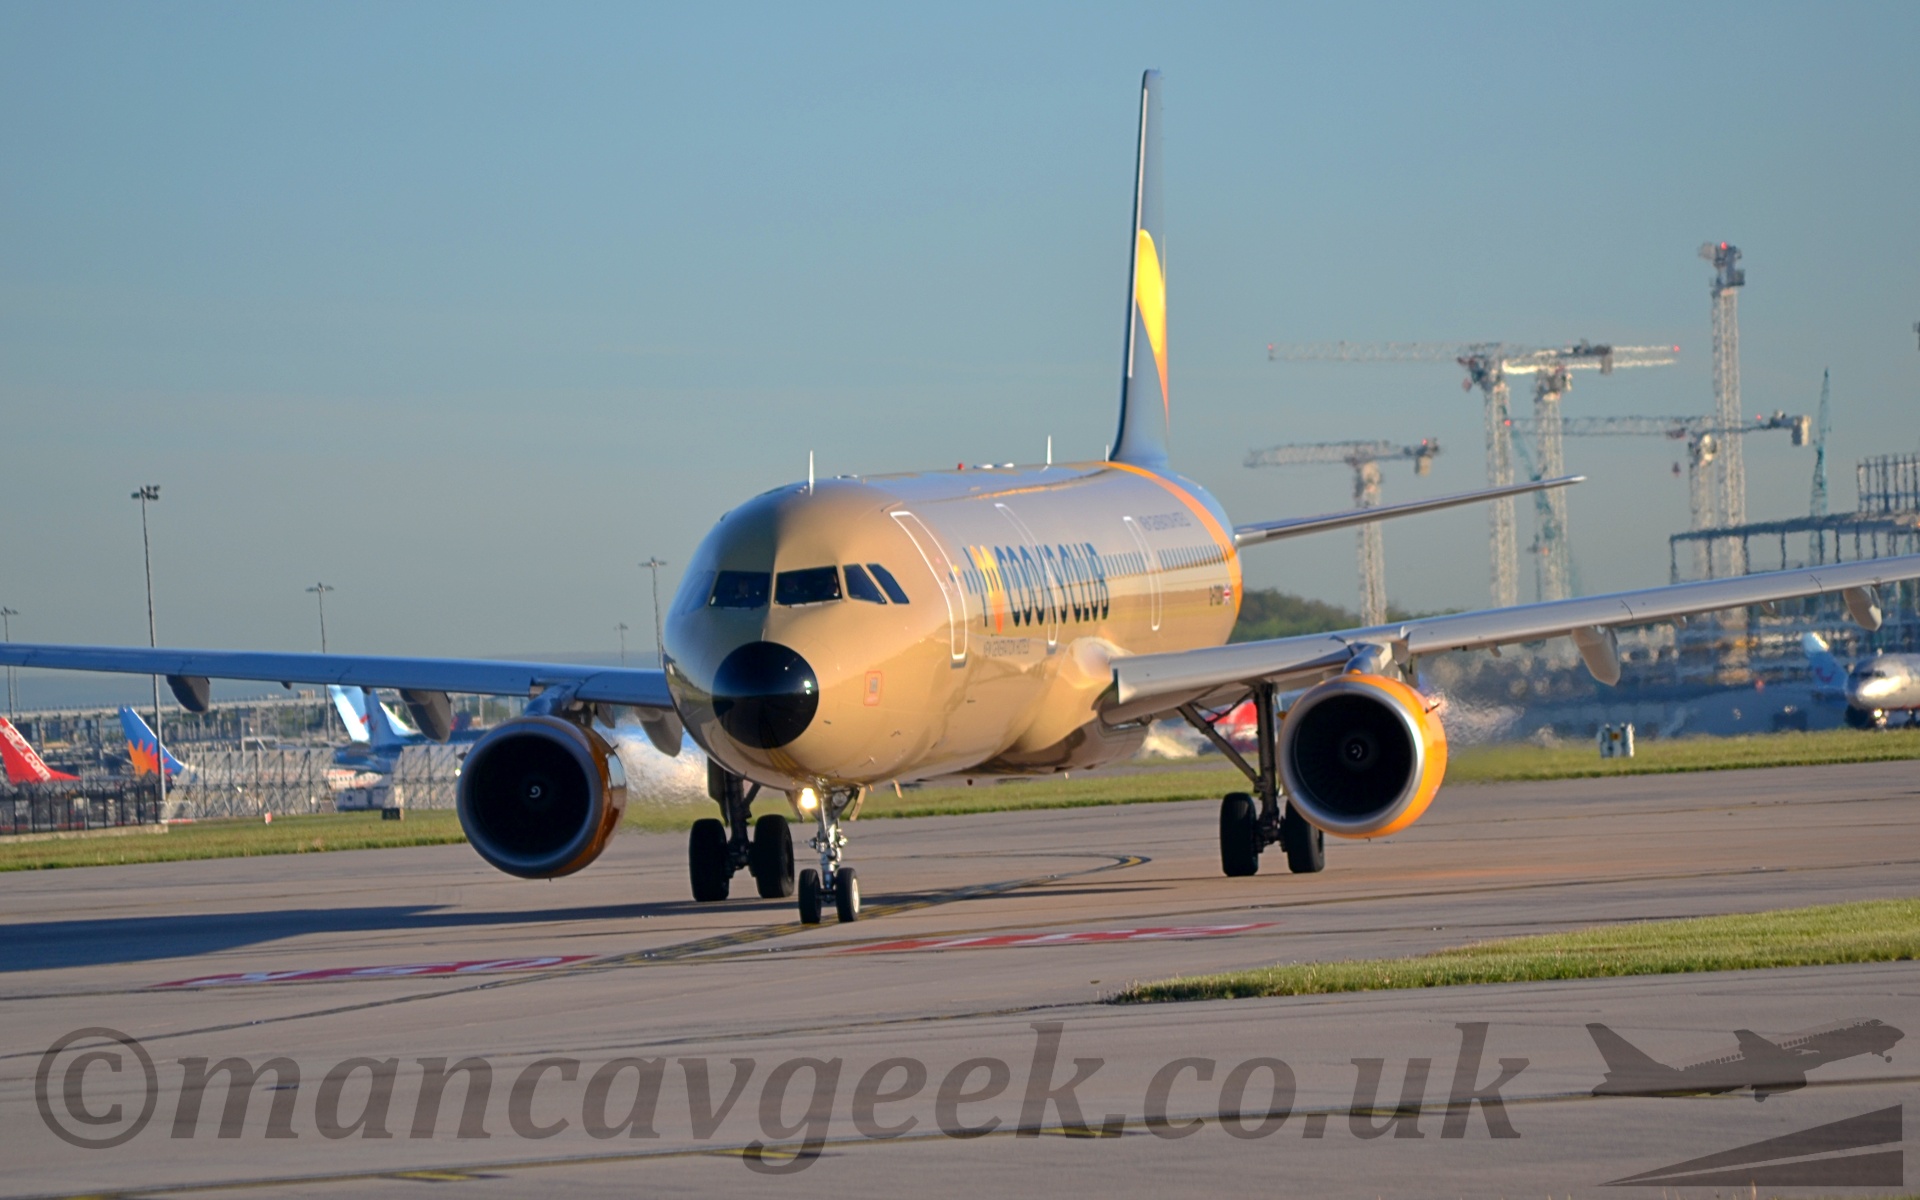 Side view of a twin engined jet airliner taxiing from right to left and slightly towards the camera. The planes body is an unfortunate shade of brown, with "I (heart) Cook's Club" titles on the forward fuselage, with a large yellow and orange heart shape in place of the word. The rear fuselage and tail are dark grey, with a diagonal yellow band running around the fuselage. The engine pods are the same bright yellow. In the background, several planes can be seen clustered under the left wing, while several tall cranes soar into the glorious blue sky above the left wing.